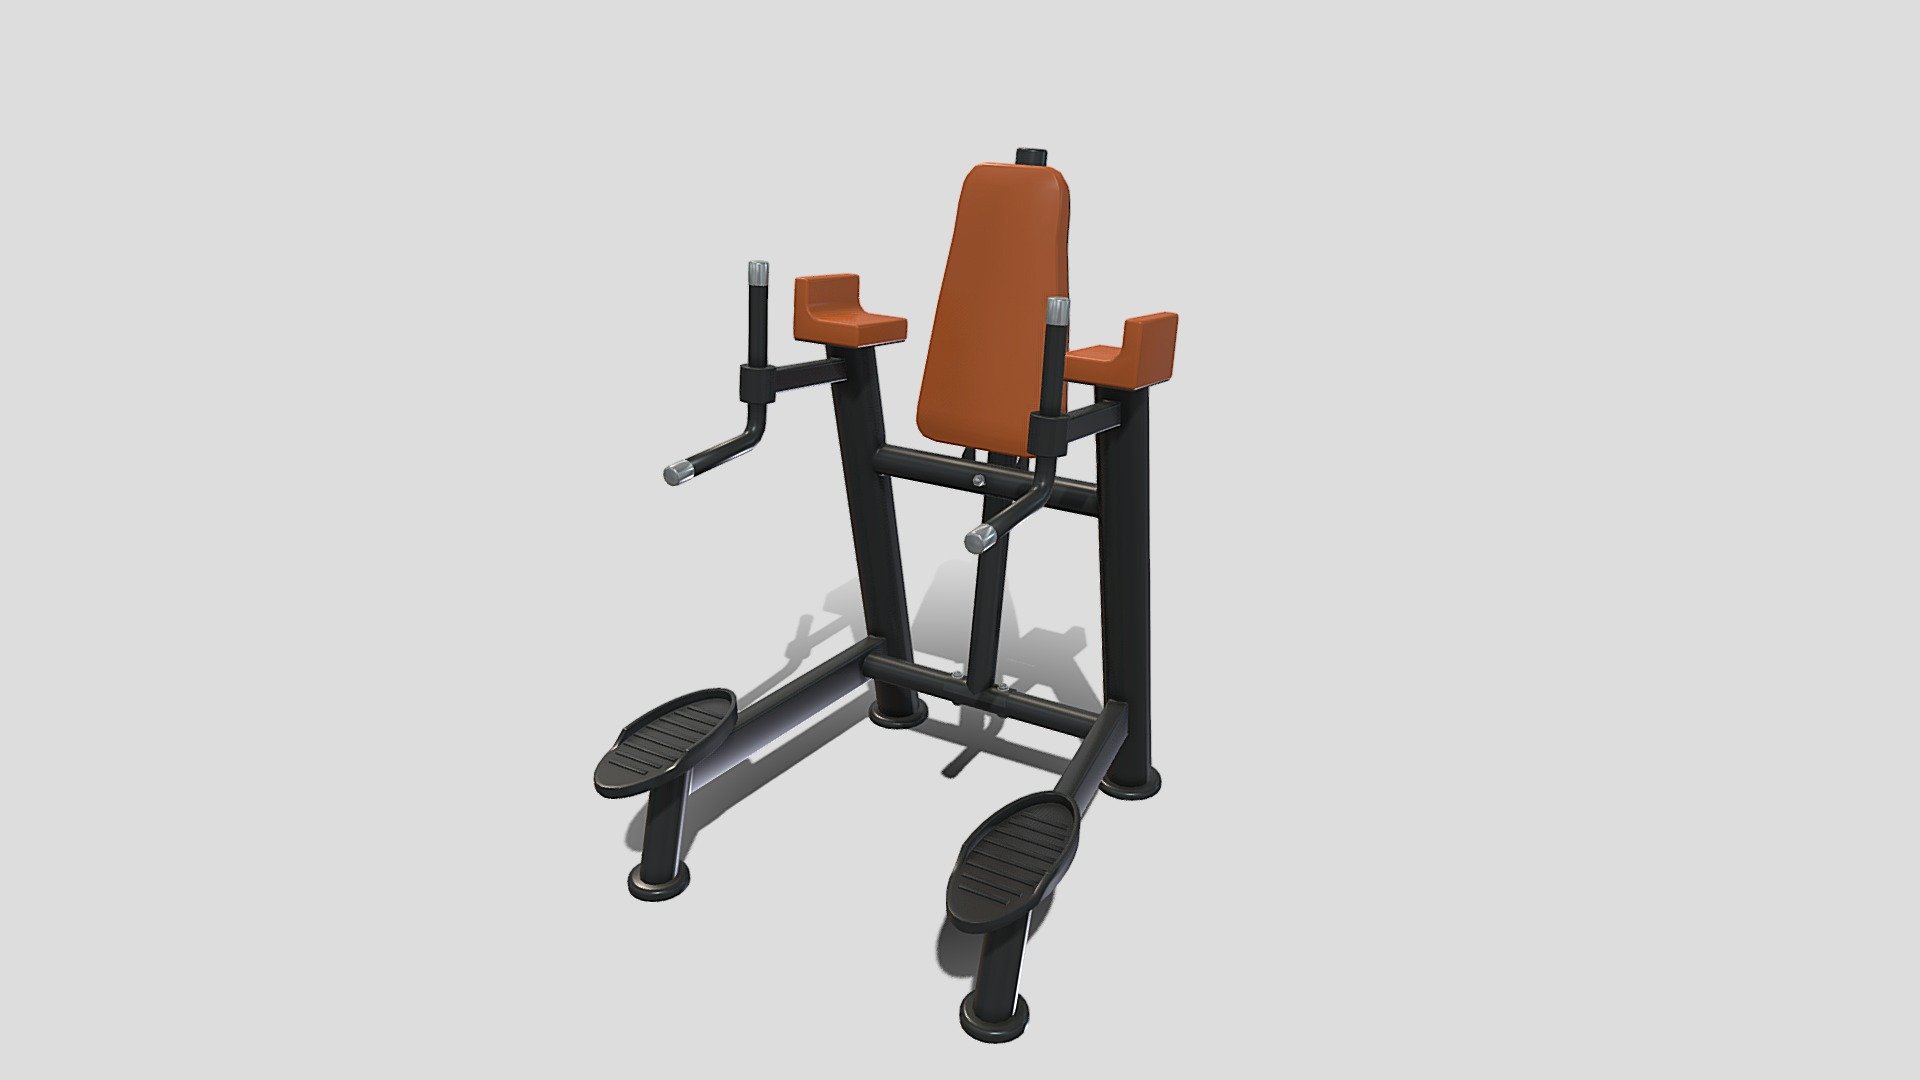 Gym machine 3d model built to real size, rendered with Cycles in Blender, as per seen on attached images. 

File formats:
-.blend, rendered with cycles, as seen in the images;
-.obj, with materials applied;
-.dae, with materials applied;
-.fbx, with materials applied;
-.stl;

Files come named appropriately and split by file format.

3D Software:
The 3D model was originally created in Blender 3.1 and rendered with Cycles.

Materials and textures:
The models have materials applied in all formats, and are ready to import and render.
Materials are image based using PBR, the model comes with four 4k png image textures.

Preview scenes:
The preview images are rendered in Blender using its built-in render engine &lsquo;Cycles'.
Note that the blend files come directly with the rendering scene included and the render command will generate the exact result as seen in previews.

General:
The models are built mostly out of quads.

For any problems please feel free to contact me.

Don't forget to rate and enjoy! - Chin Up And Dip Station V2 - Buy Royalty Free 3D model by dragosburian 3d model